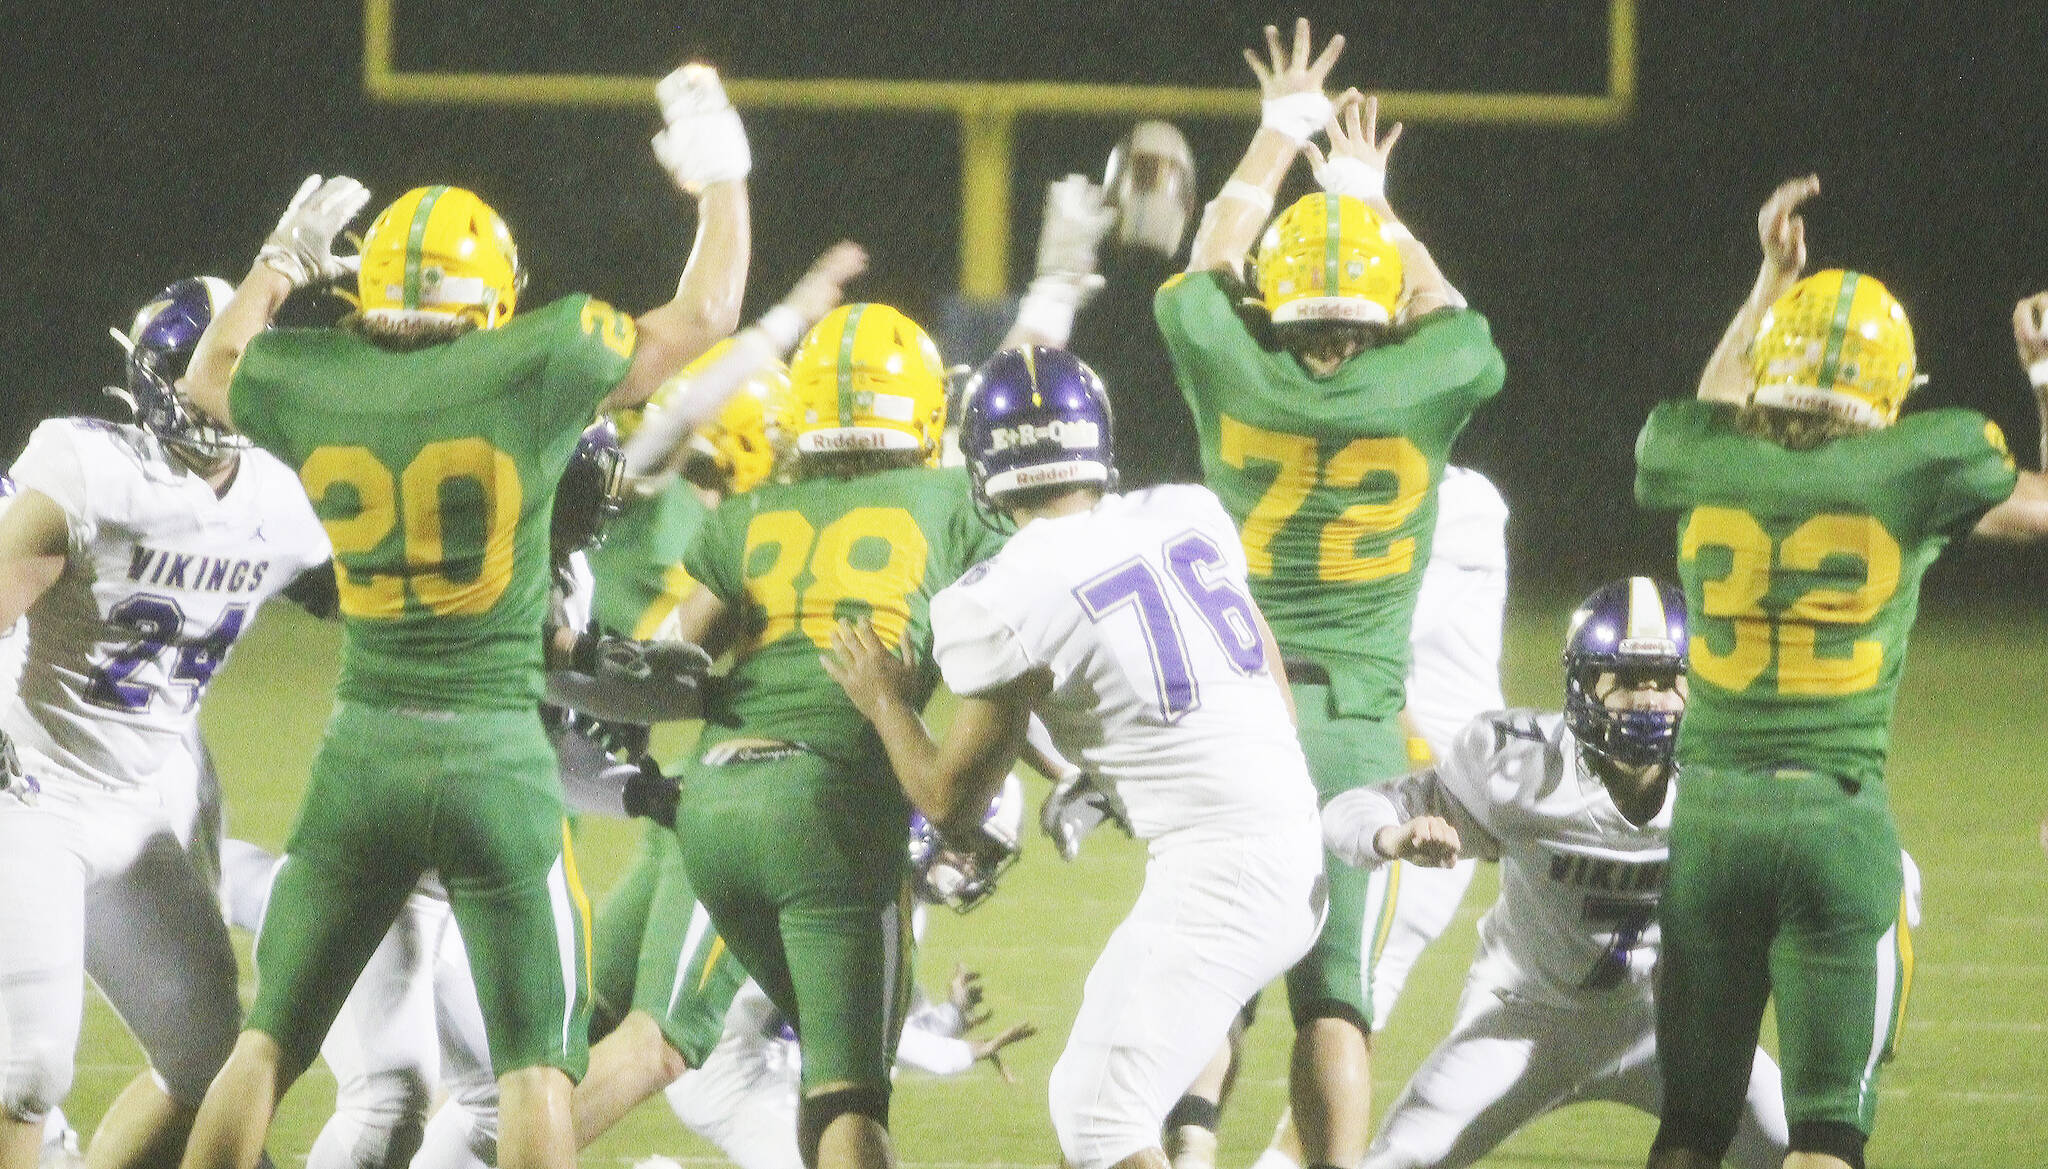 The only Viking score in the first half was this field goal, which Lynden tried to block. Sofian Hammou (76) protects for NK.